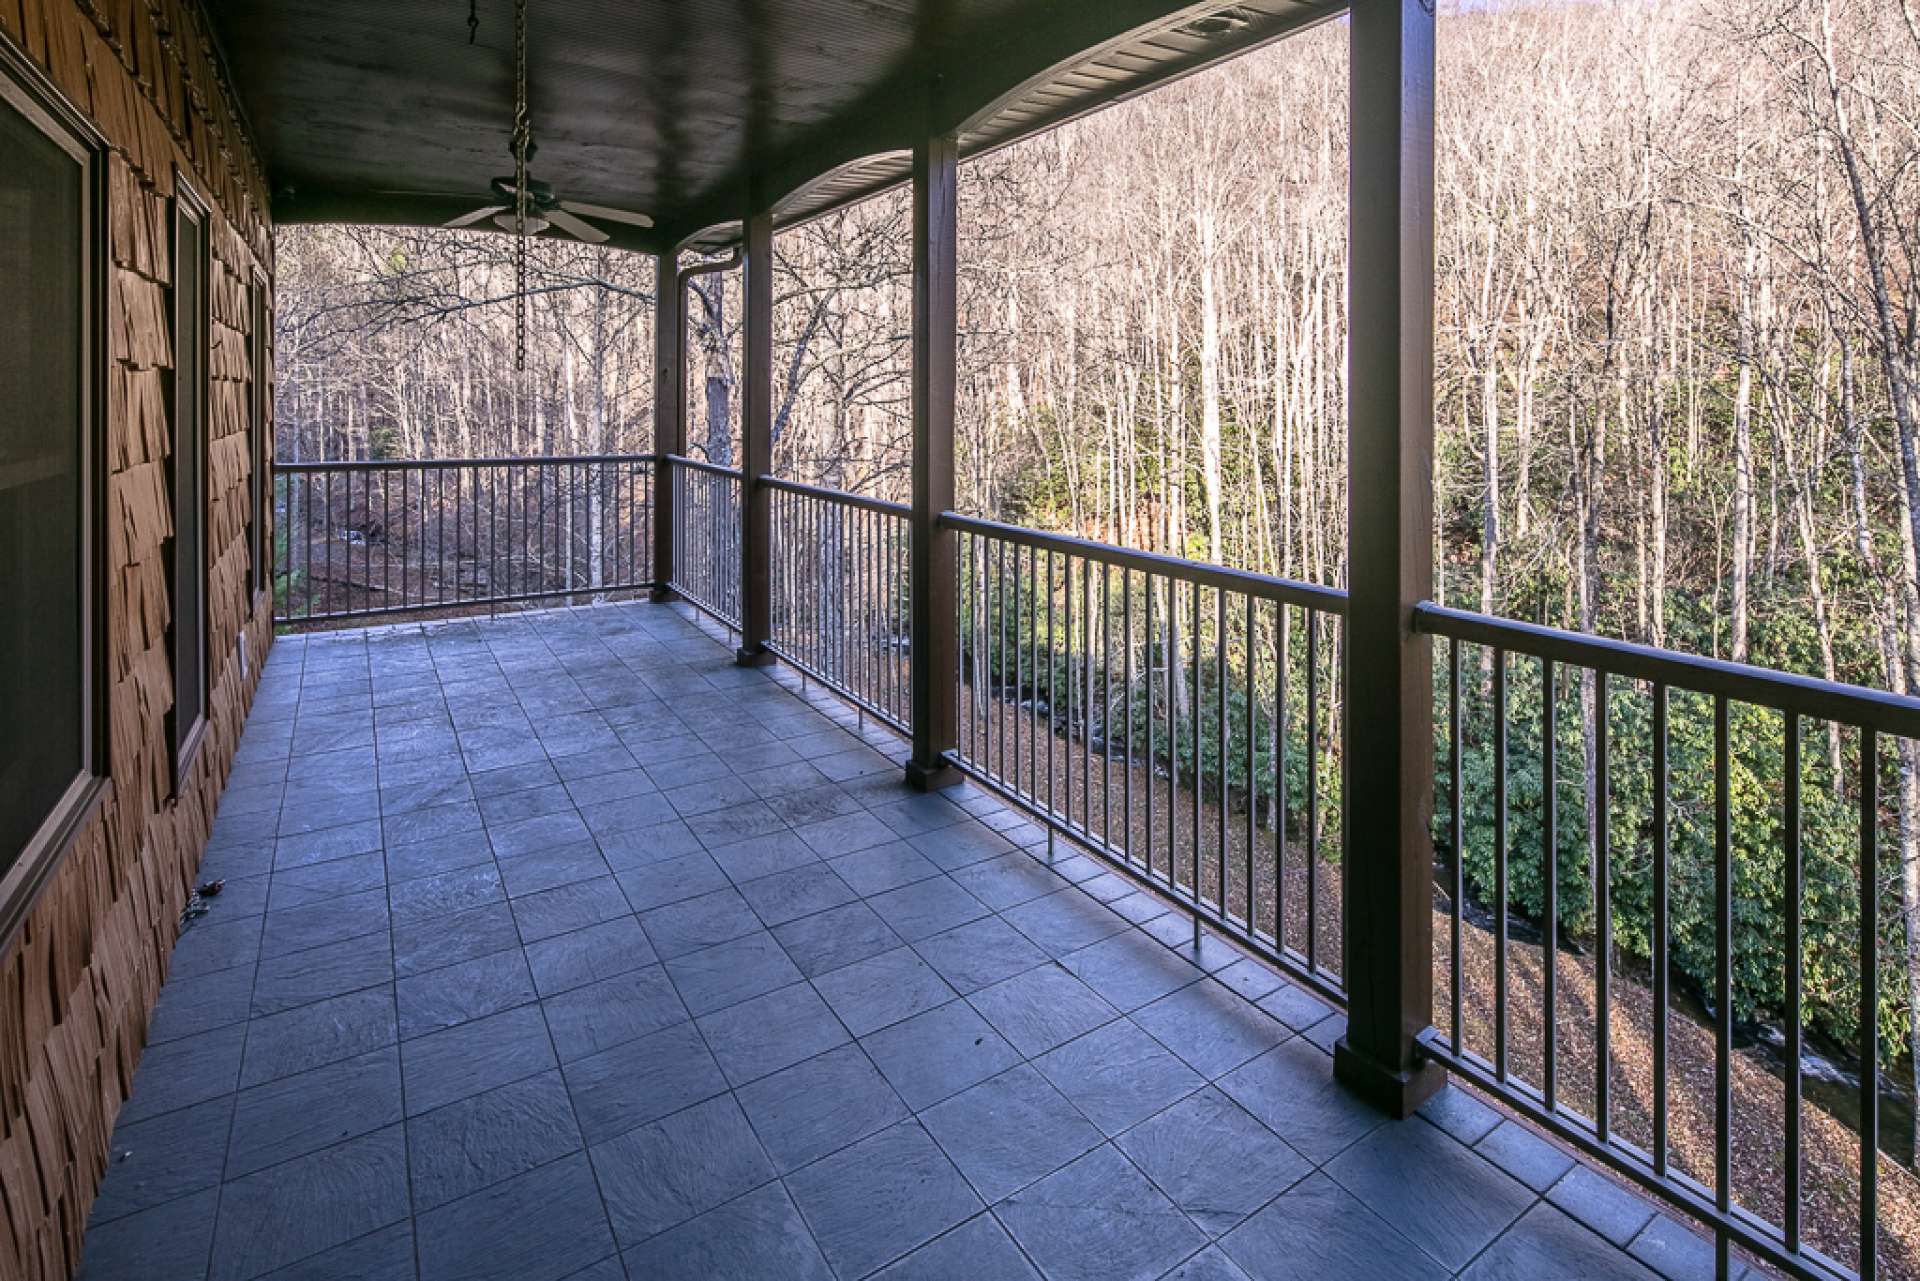 The upper level offers a covered porch to relax with the sounds of the creek and Nature.